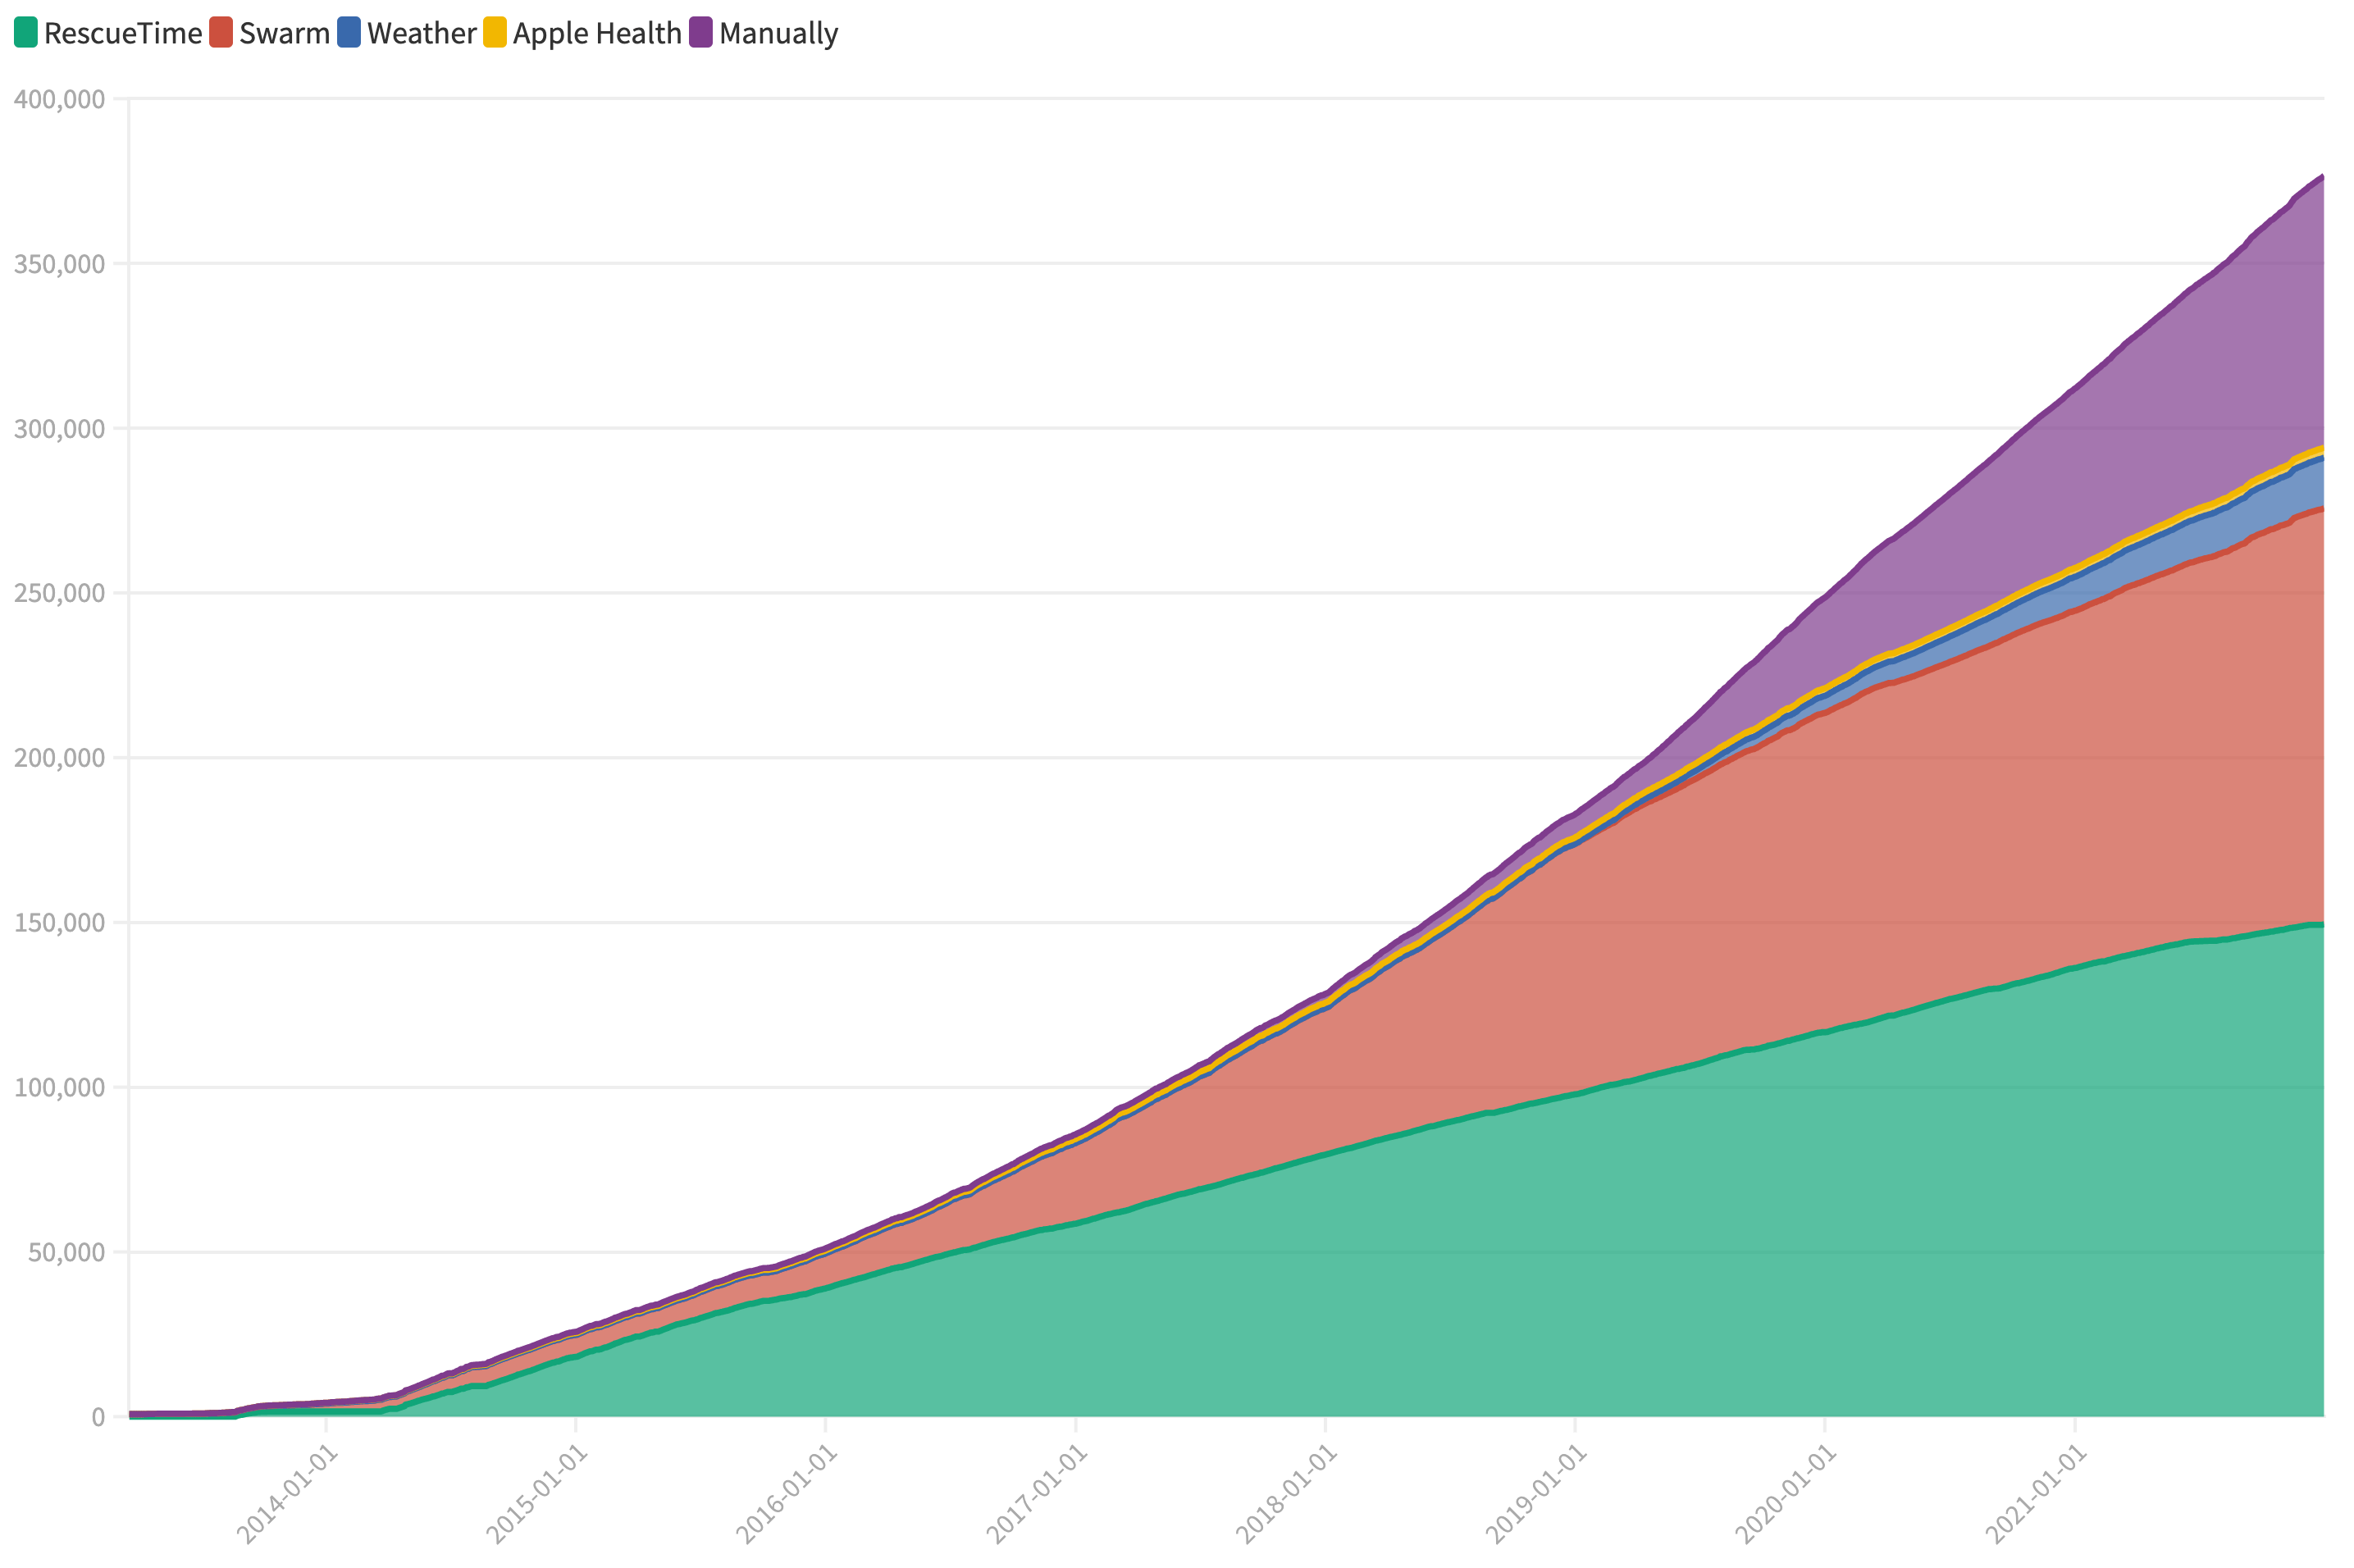 Number of Data Entries over Time